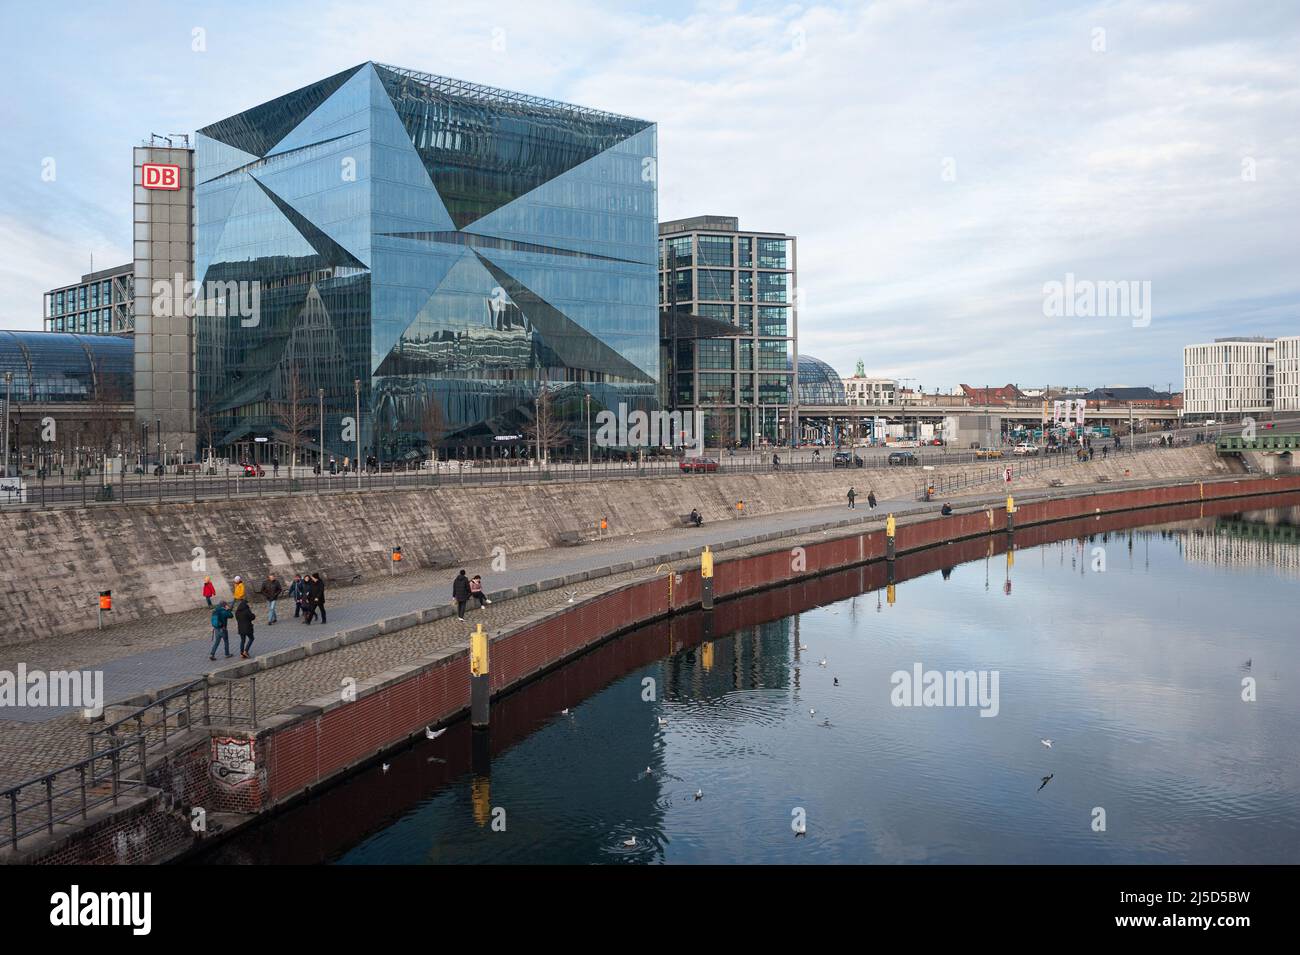 22.01.2022, Berlin, Germany, Europe - View of Berlin Central Station and the futuristic 3XN Cube Berlin building at Washingtonplatz, north of the Spree riverbank in the Mitte district. The cube-shaped office building was designed by Danish architectural firm 3XN and is part of the new Europacity. [automated translation] Stock Photo